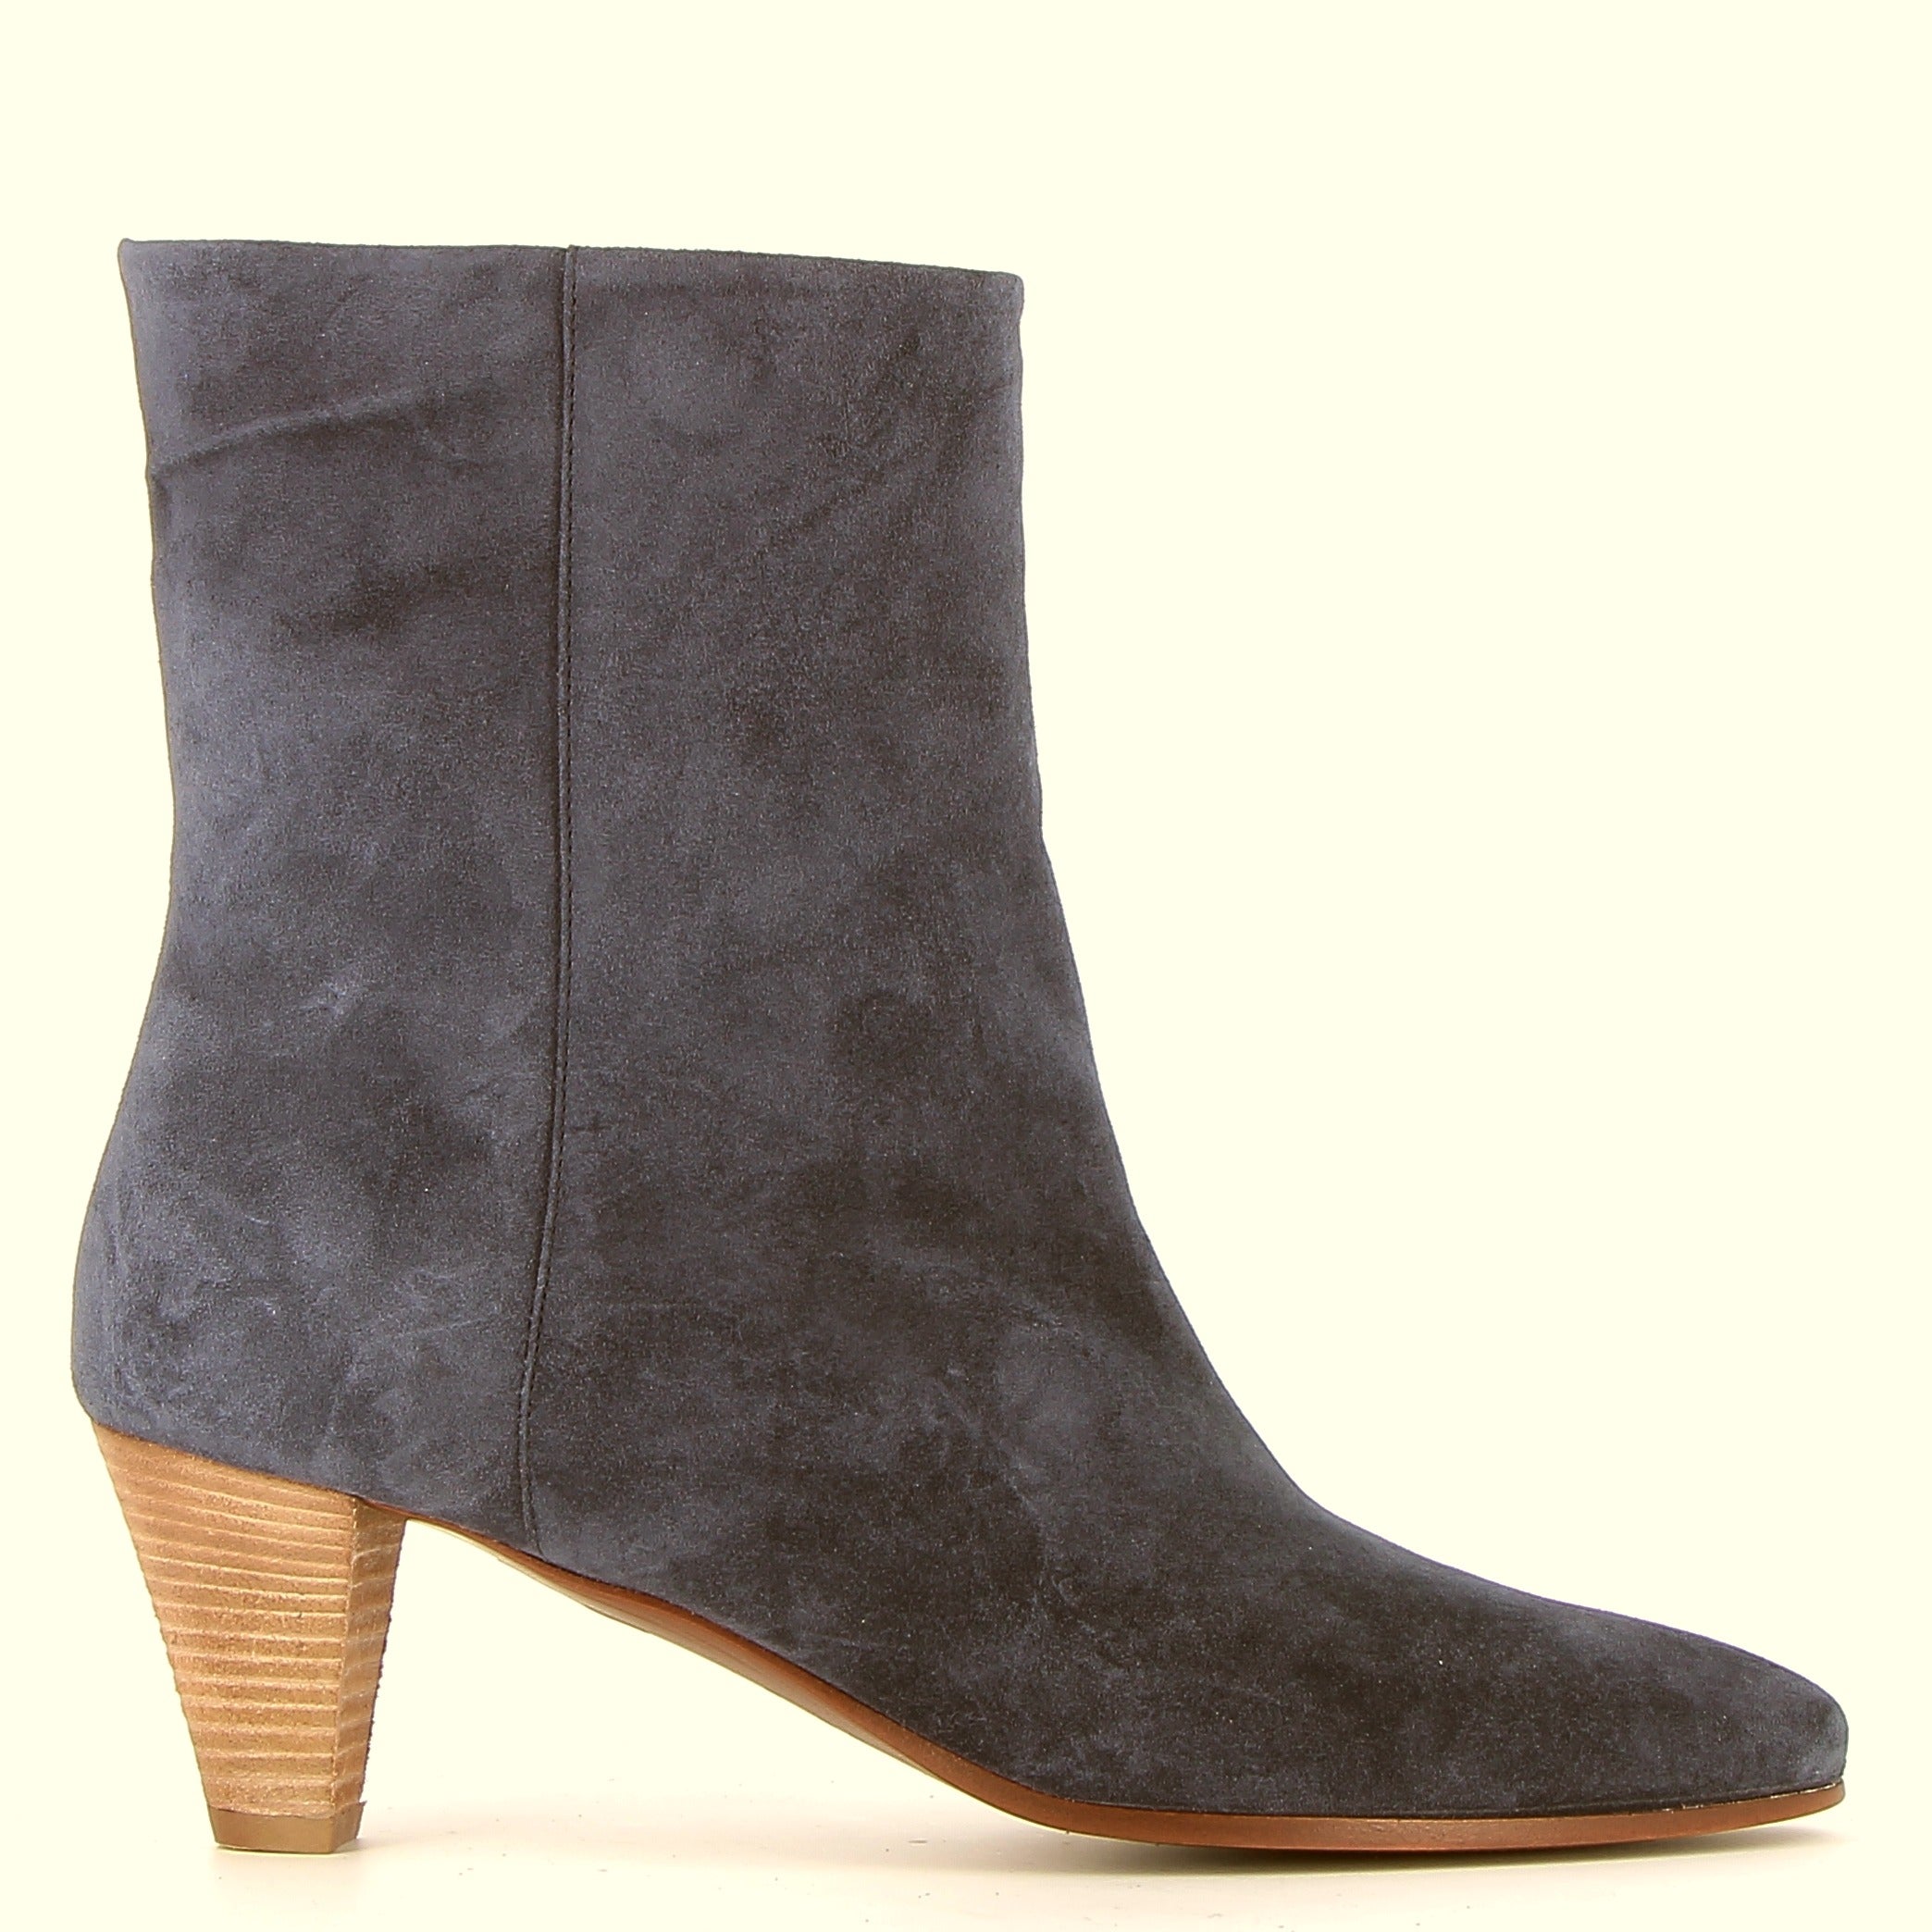 Cobalt blue suede ankle boot